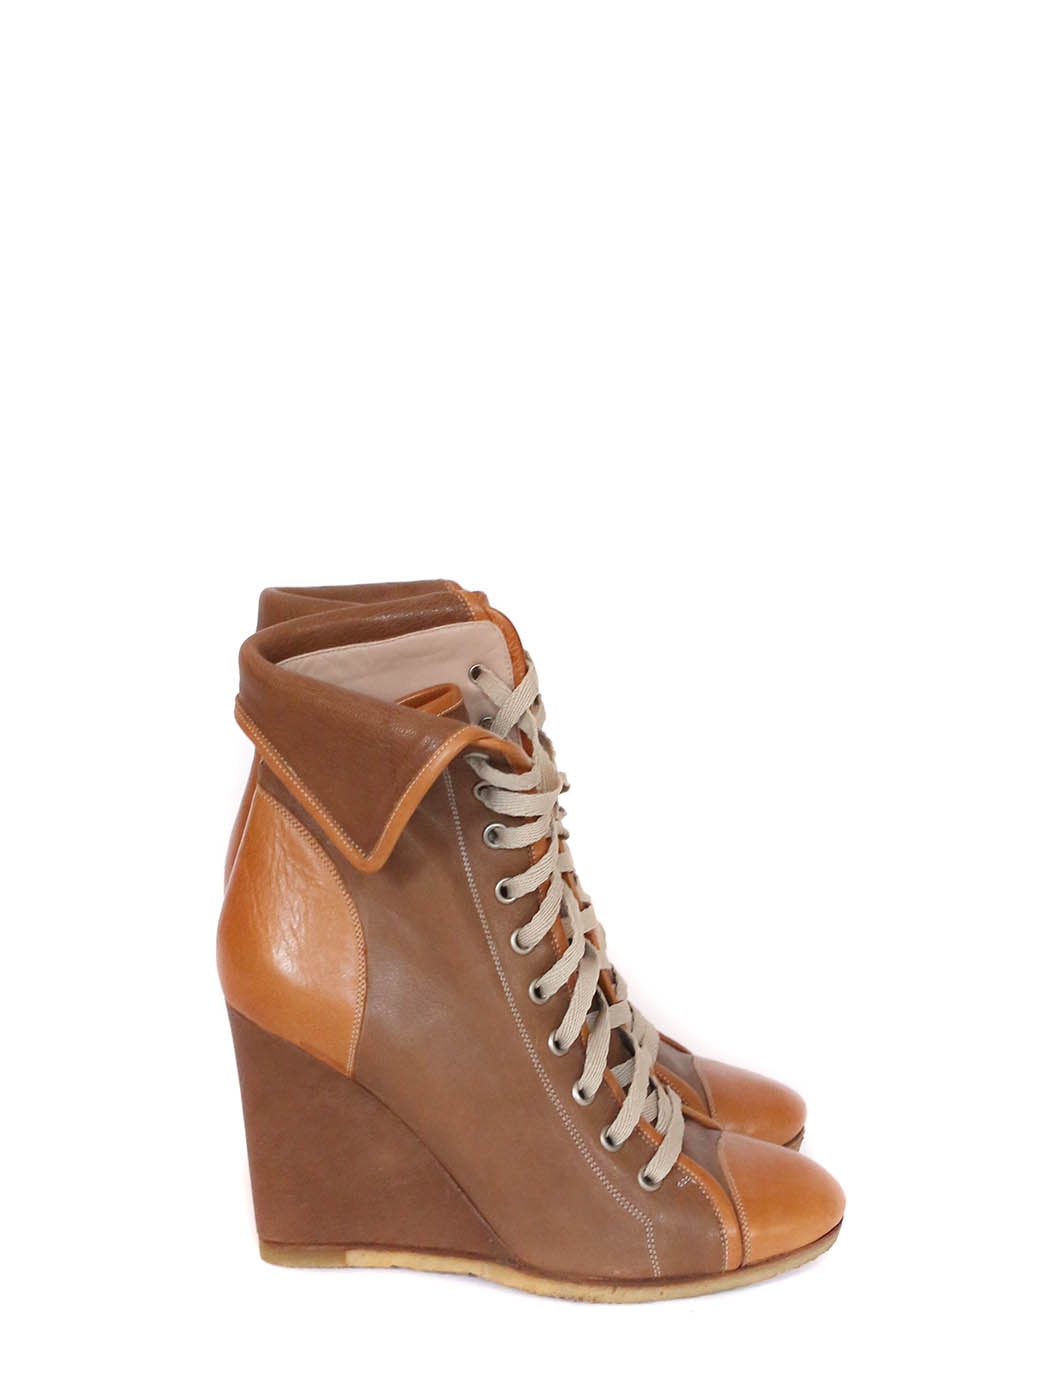 Boutique CHLOE Camel and hazelnut brown leather laced up ankle boots NEW Retail price €600 Size 36.5